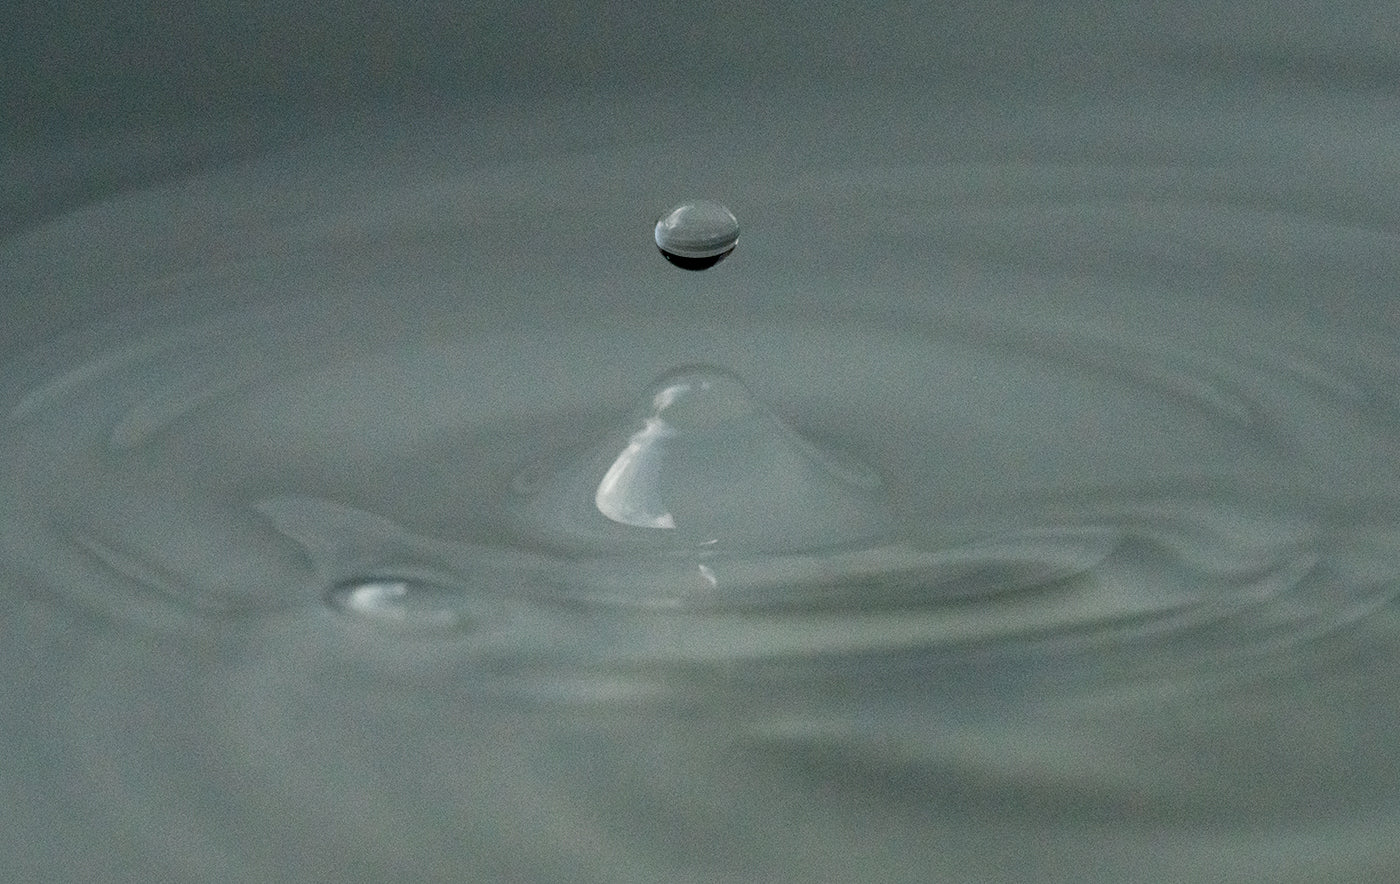 Droplet hitting water